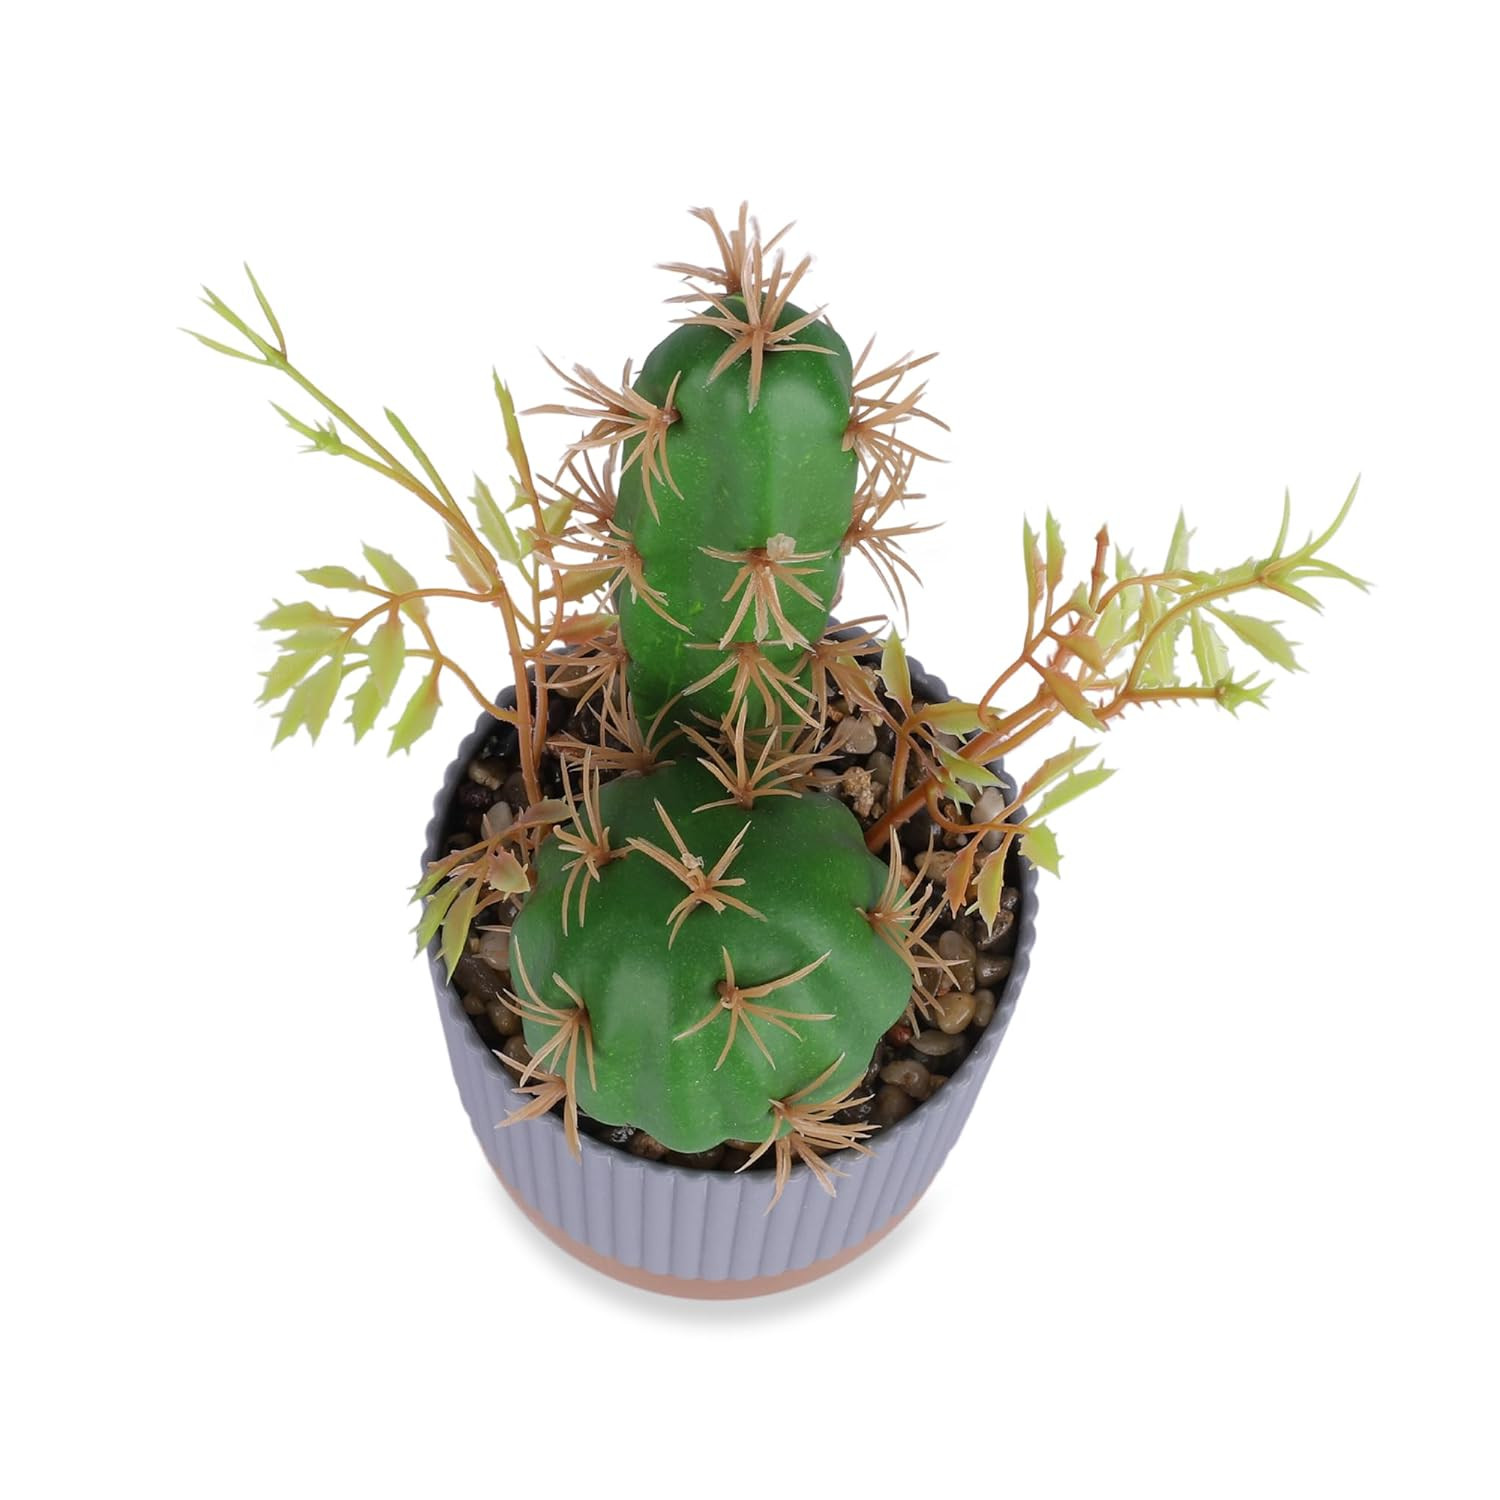 Kuber Industries Artificial Plants for Home DÃ©cor|Natural Looking Indoor Fake Plants with Pot|Artificial Flowers for Decoration (Green)